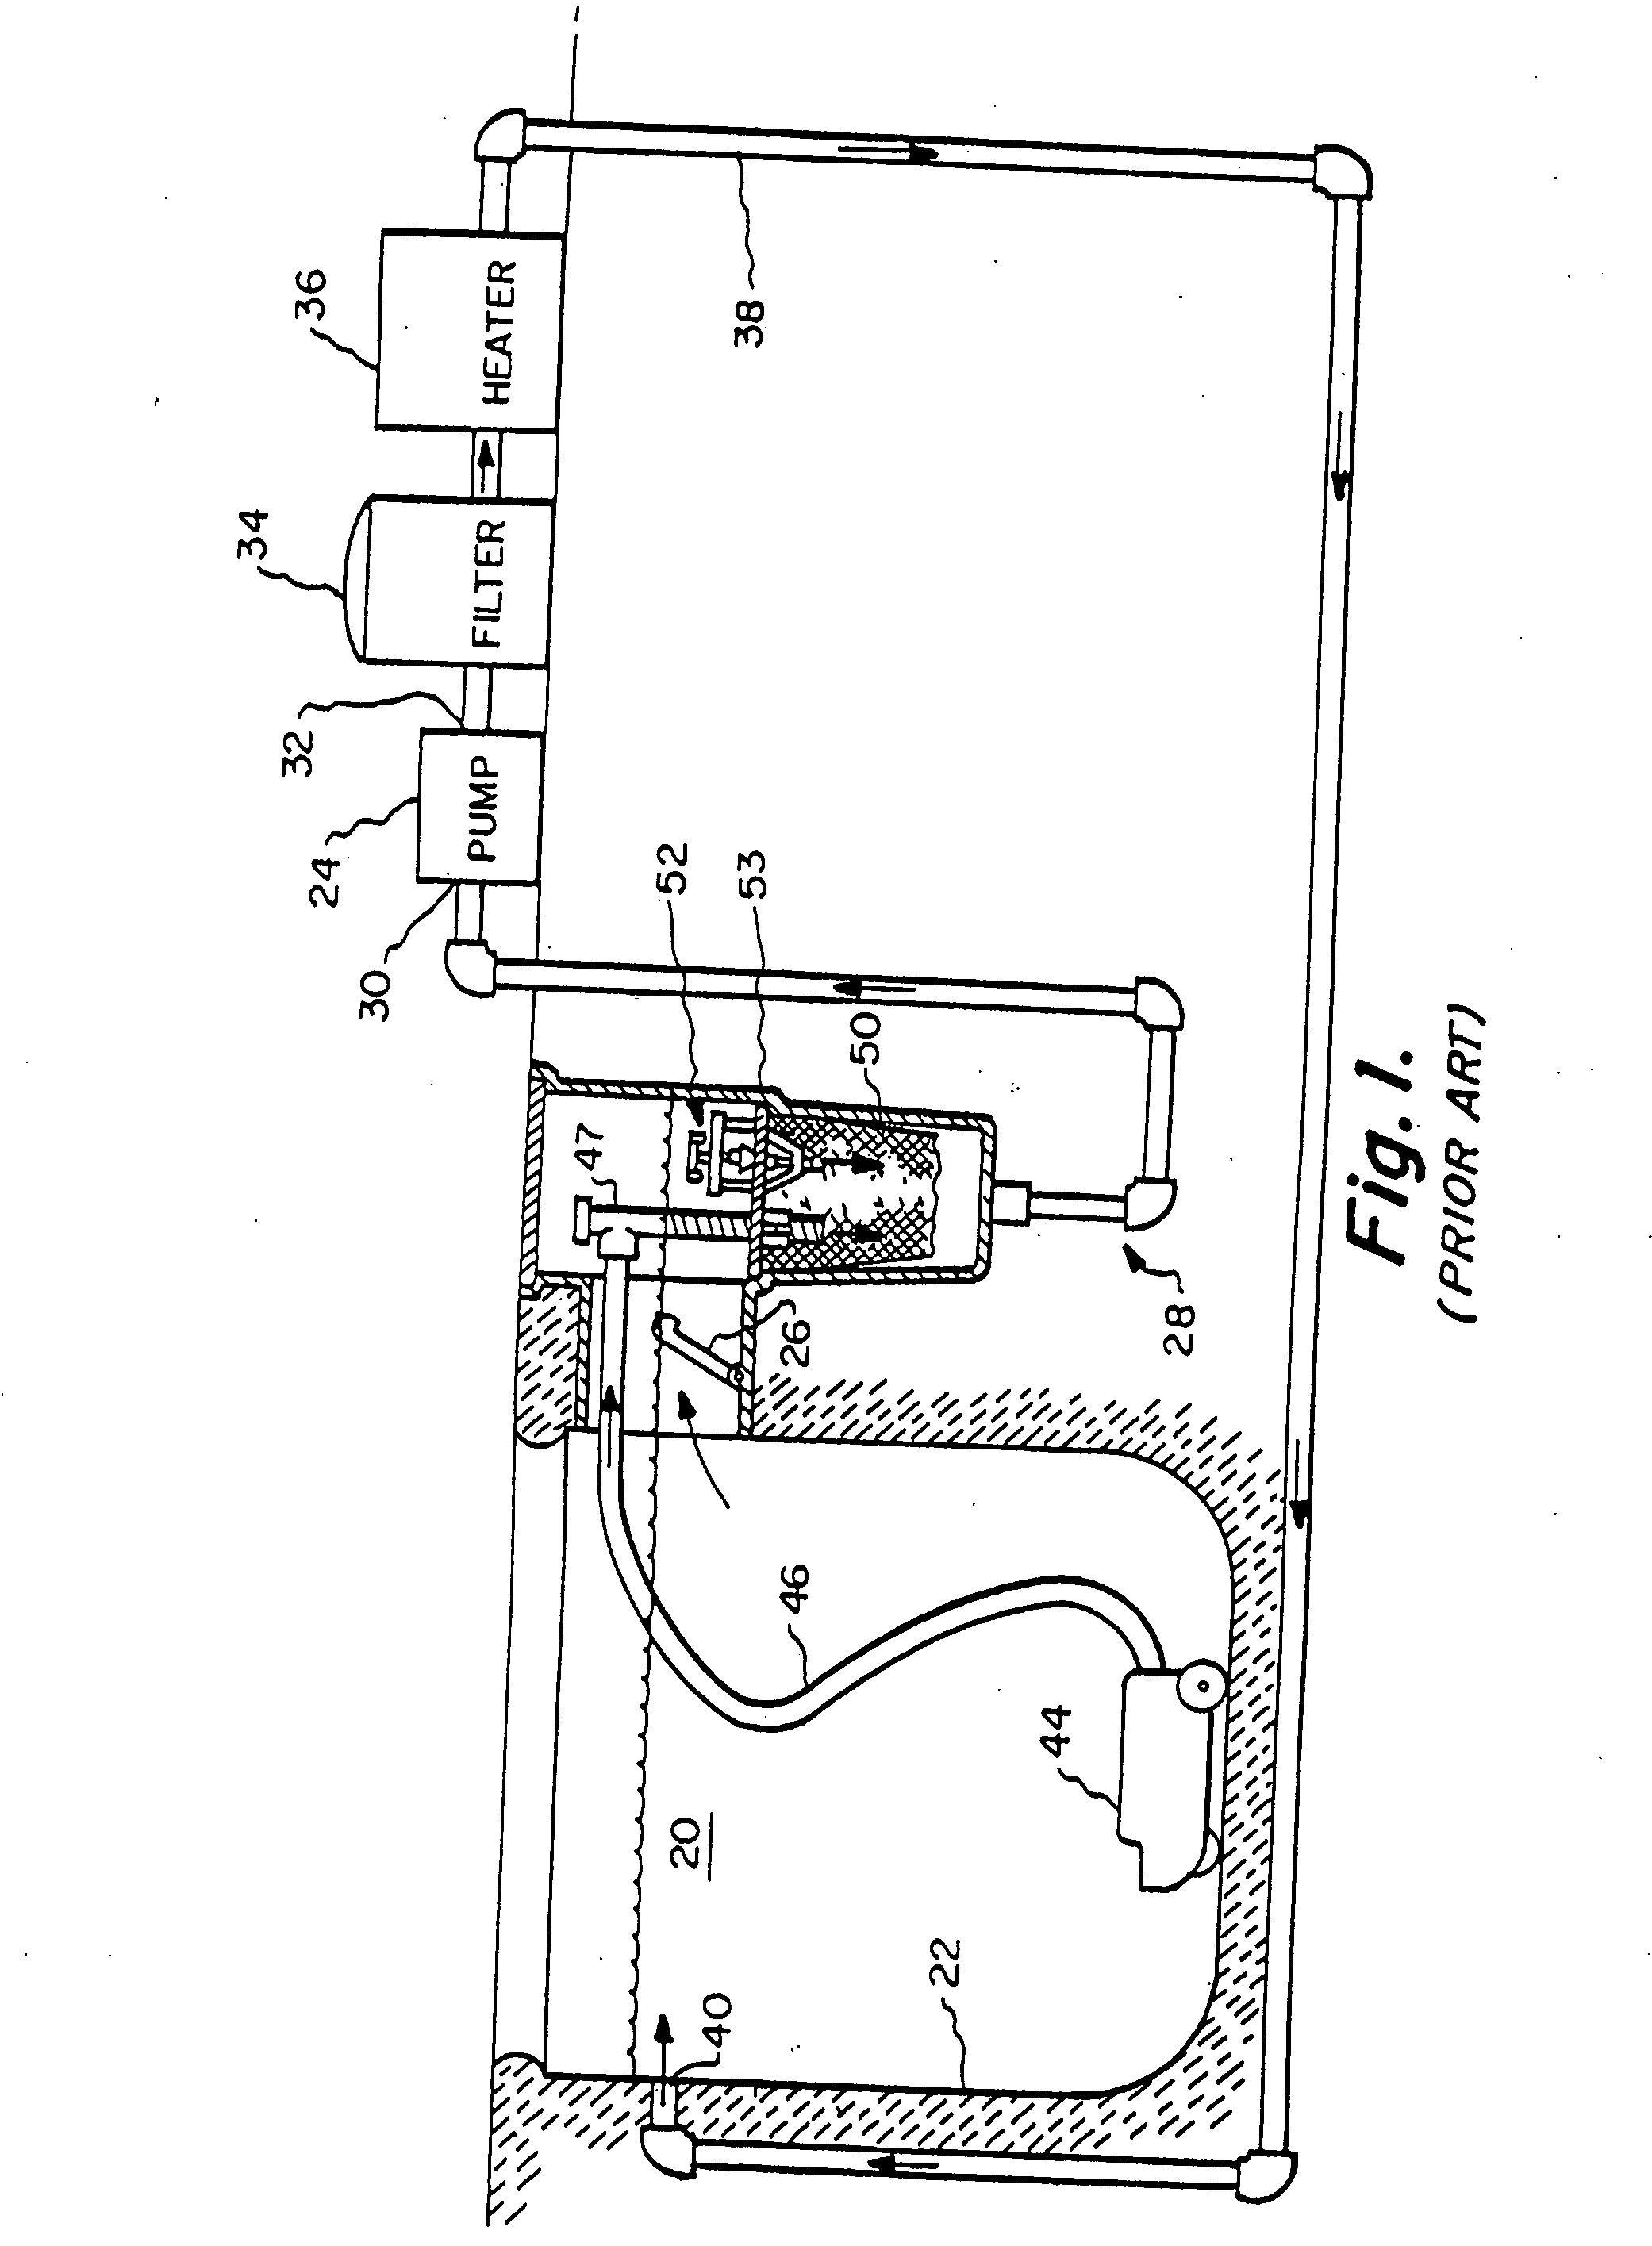 Method and apparatus for improving the performance of suction powered pool cleaning systems